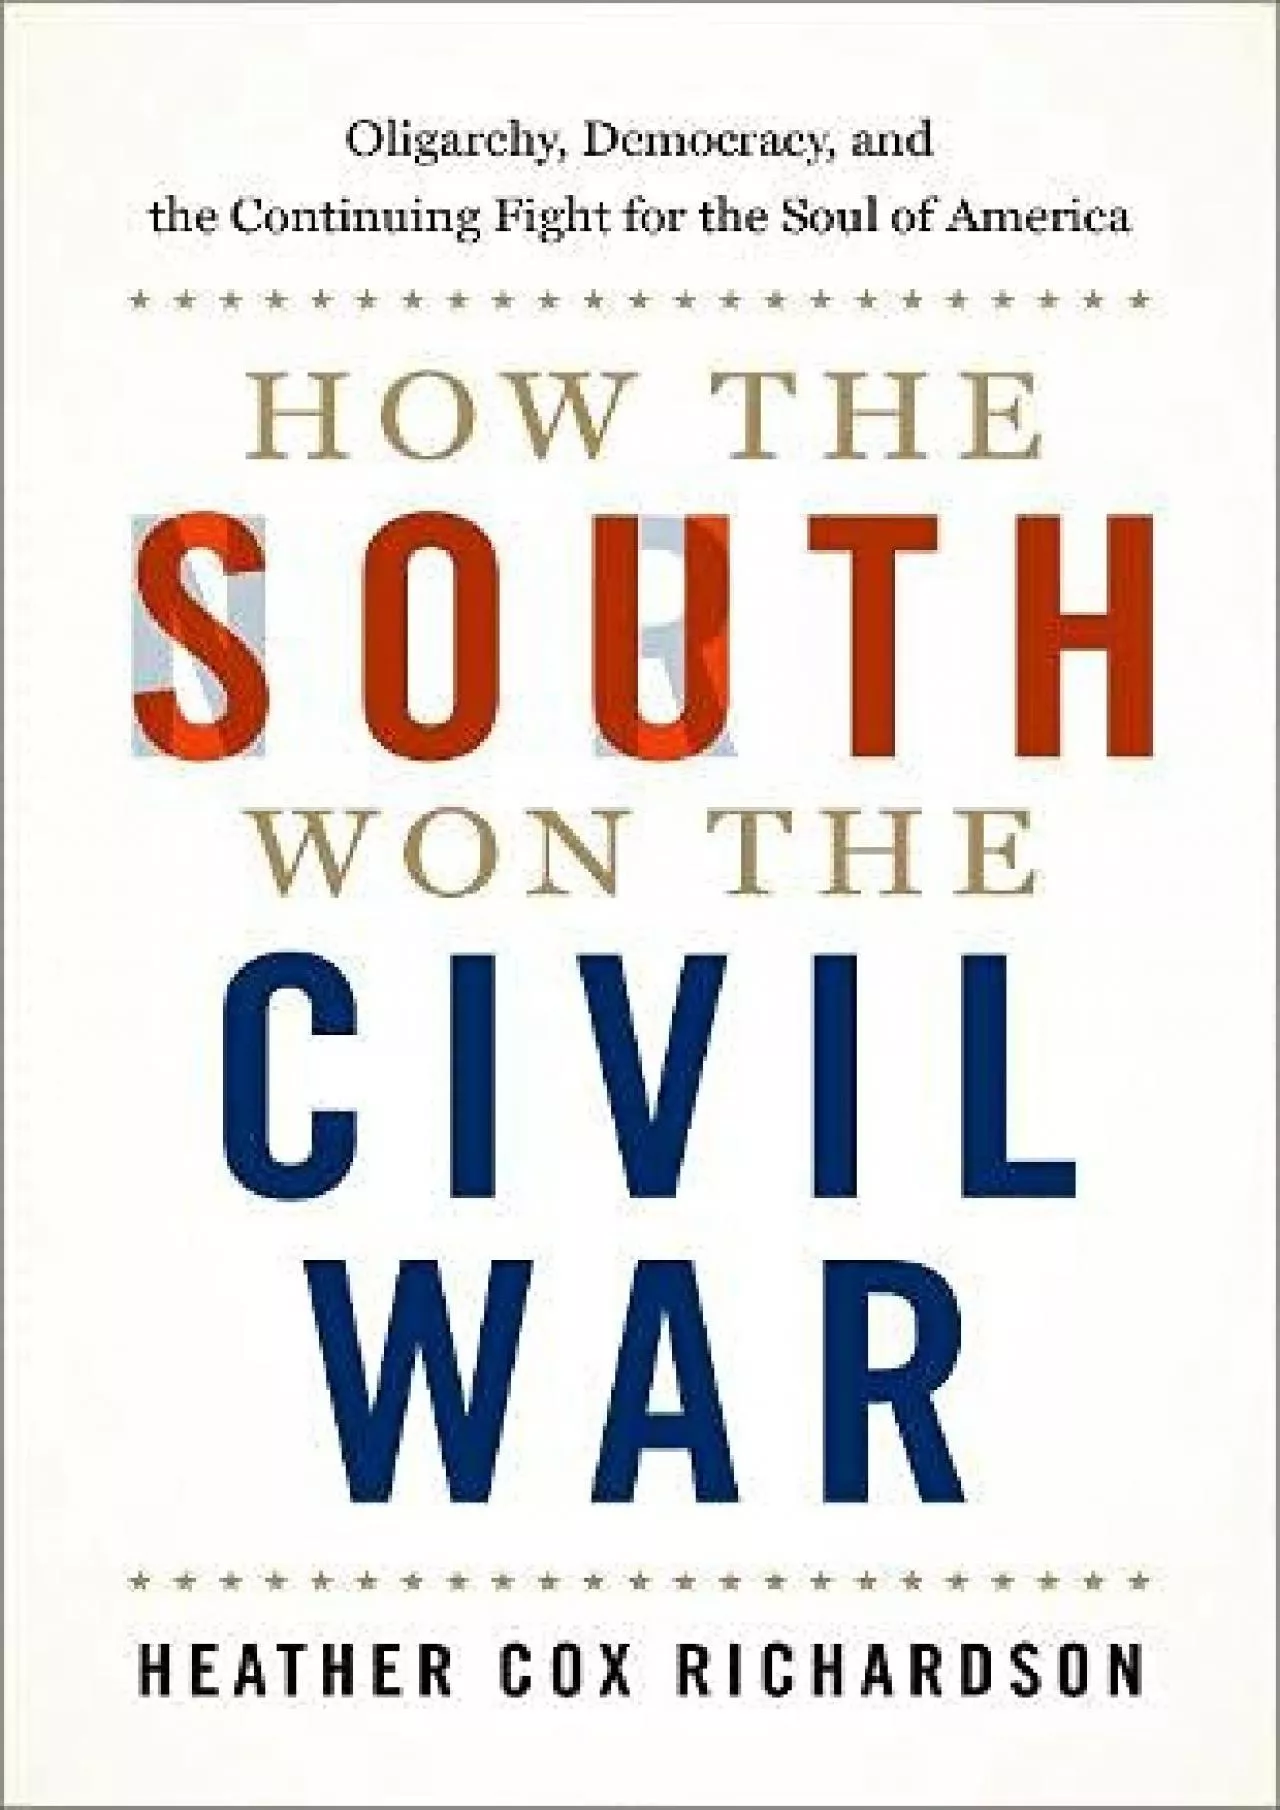 (EBOOK)-How the South Won the Civil War: Oligarchy, Democracy, and the Continuing Fight